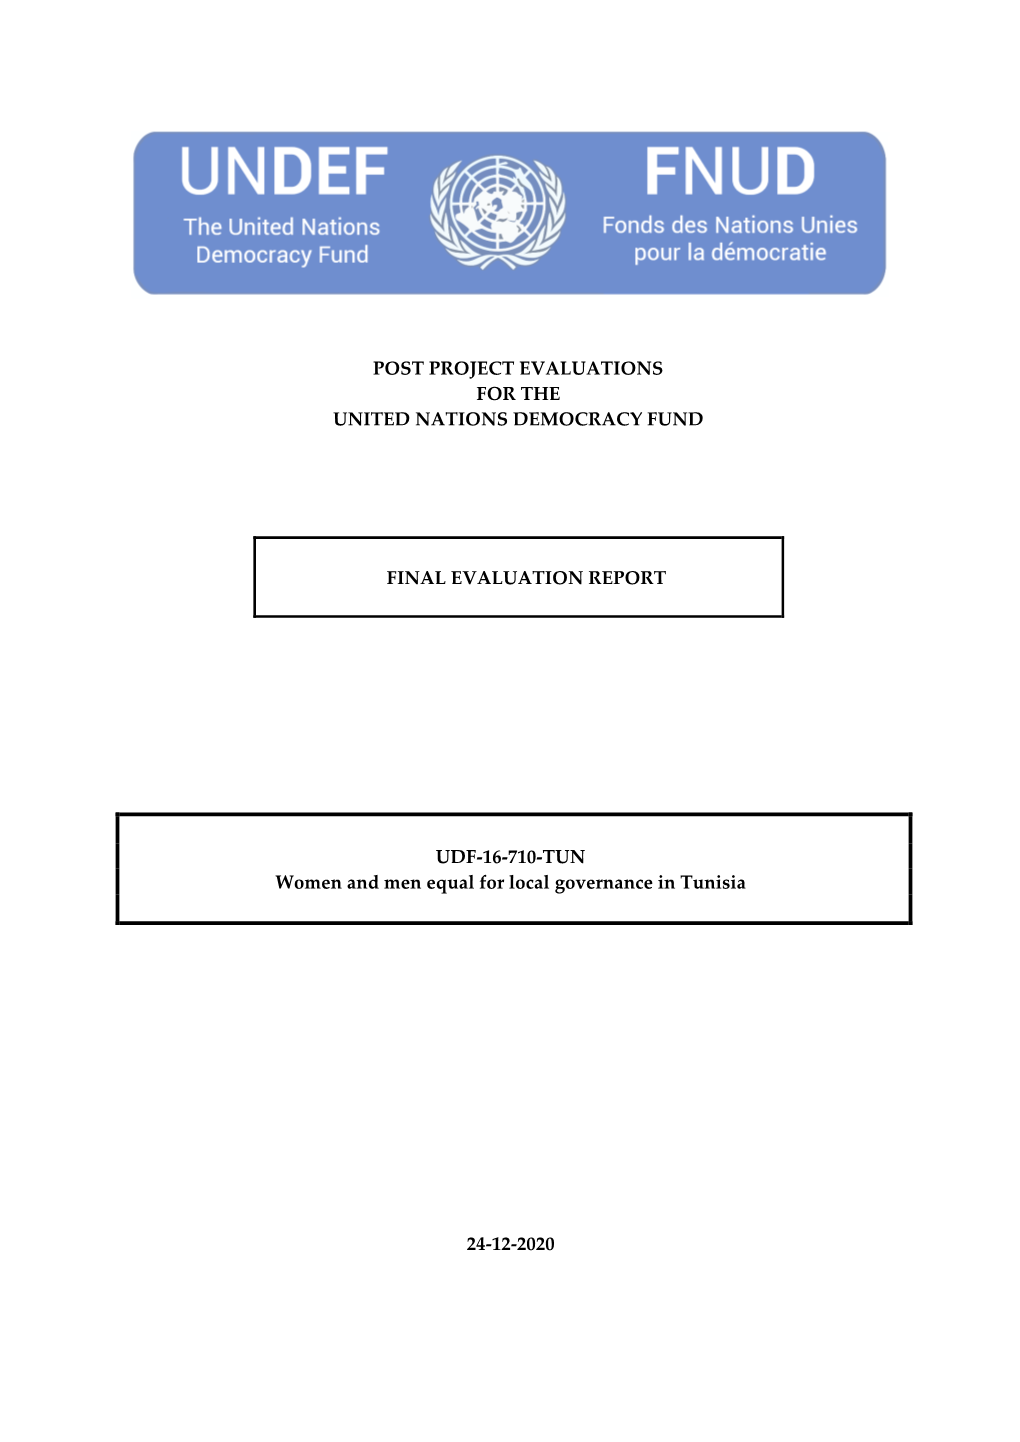 Post Project Evaluations for the United Nations Democracy Fund